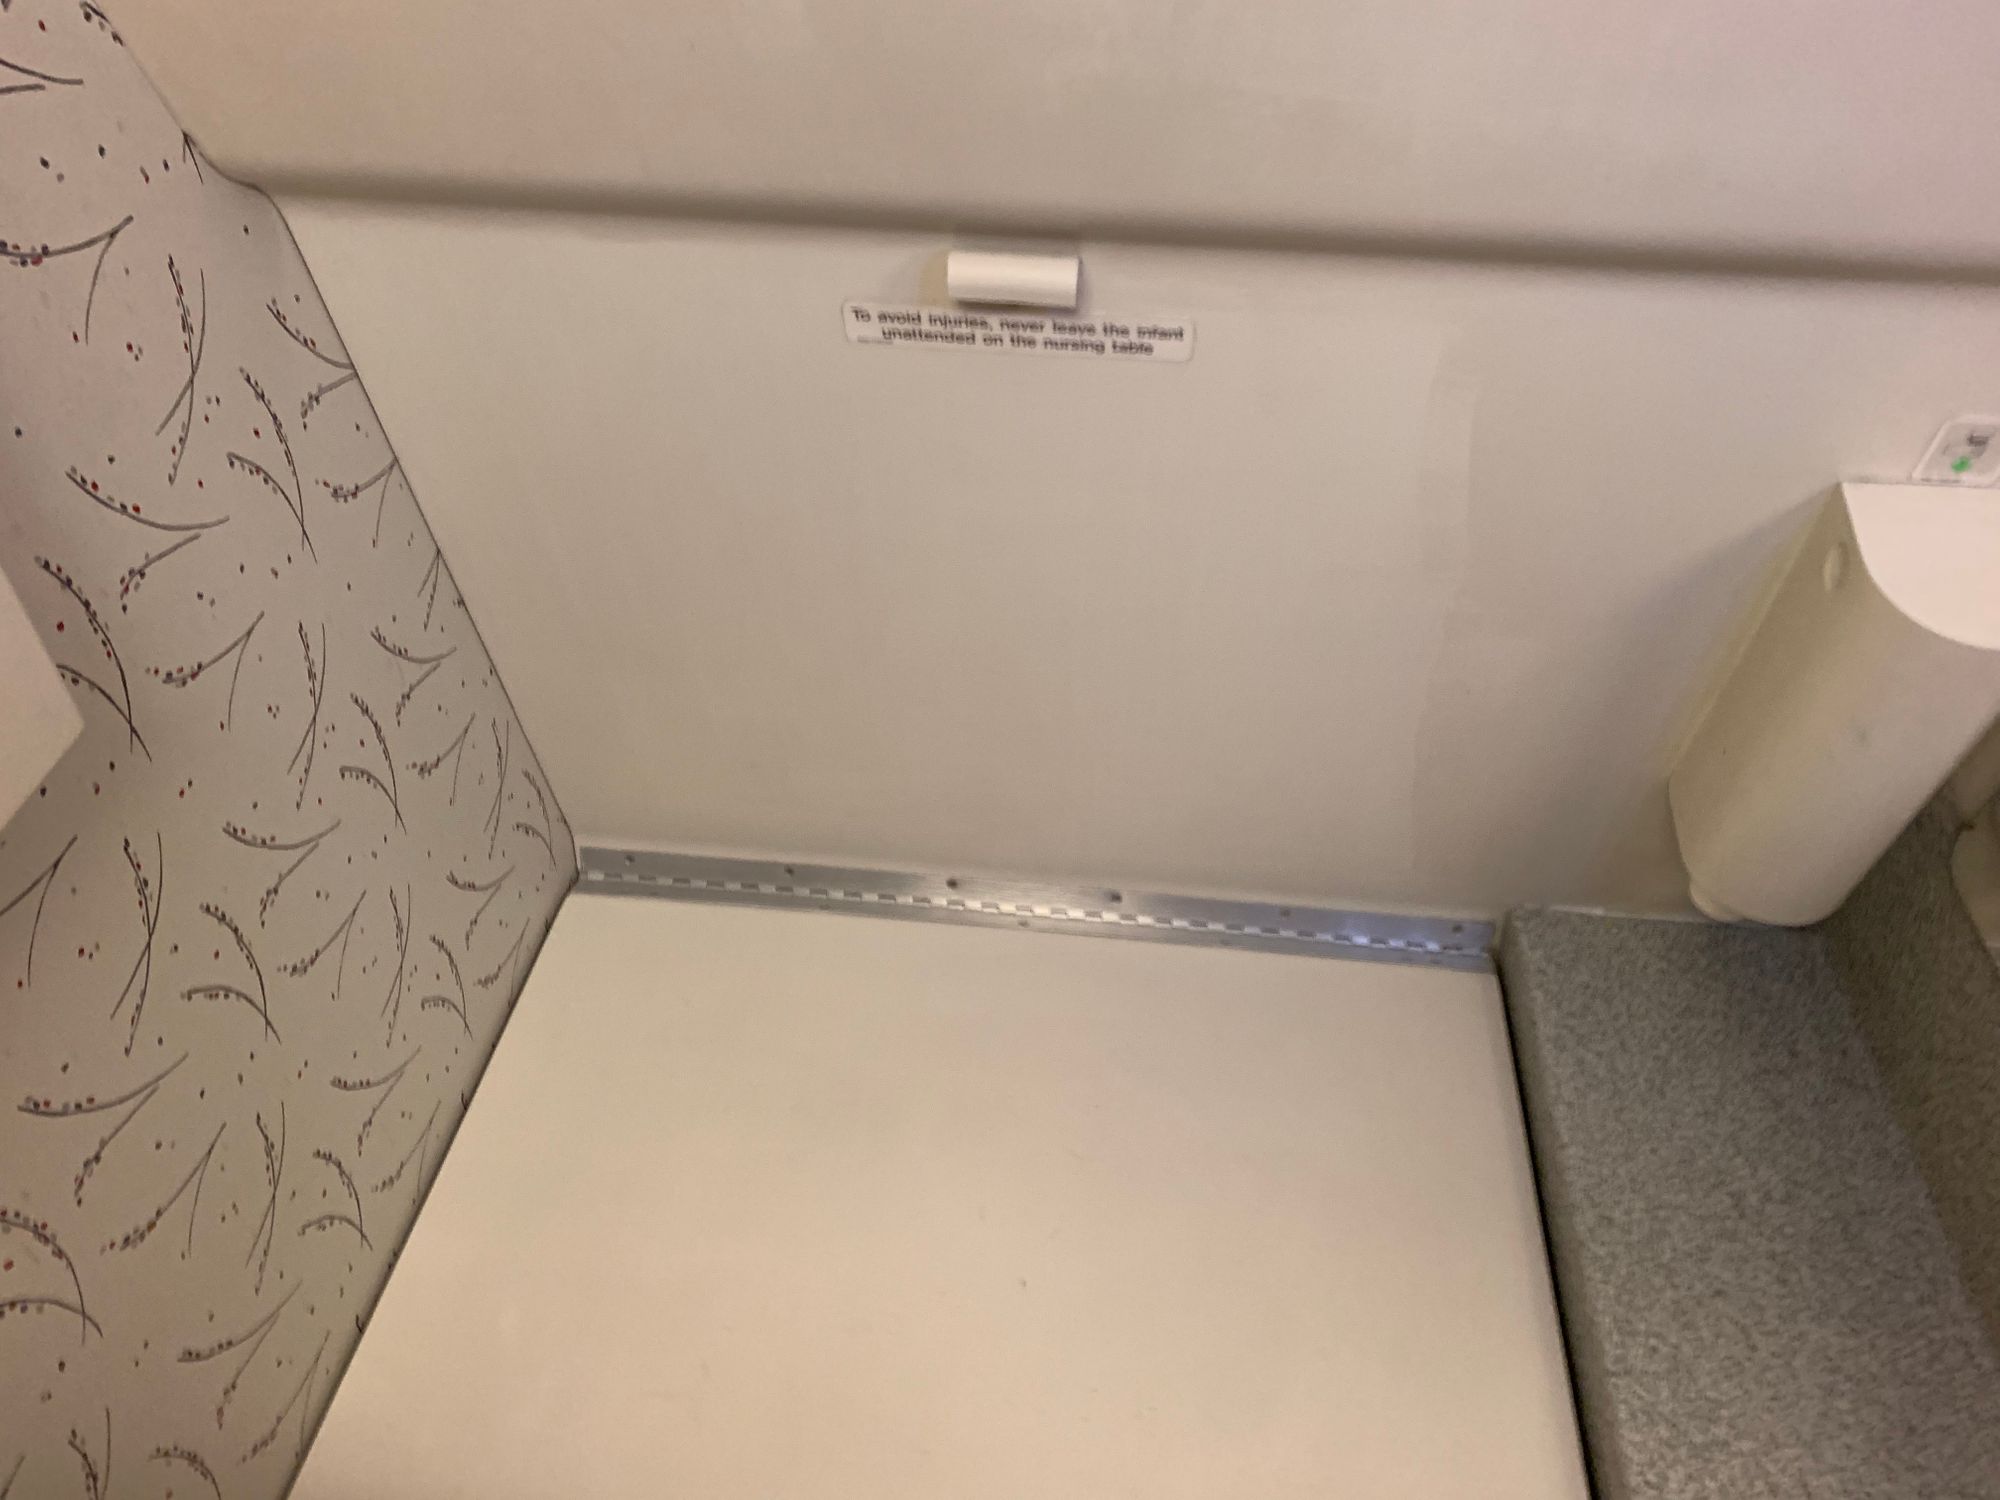 How to Change a Diaper in an Airplane Bathroom